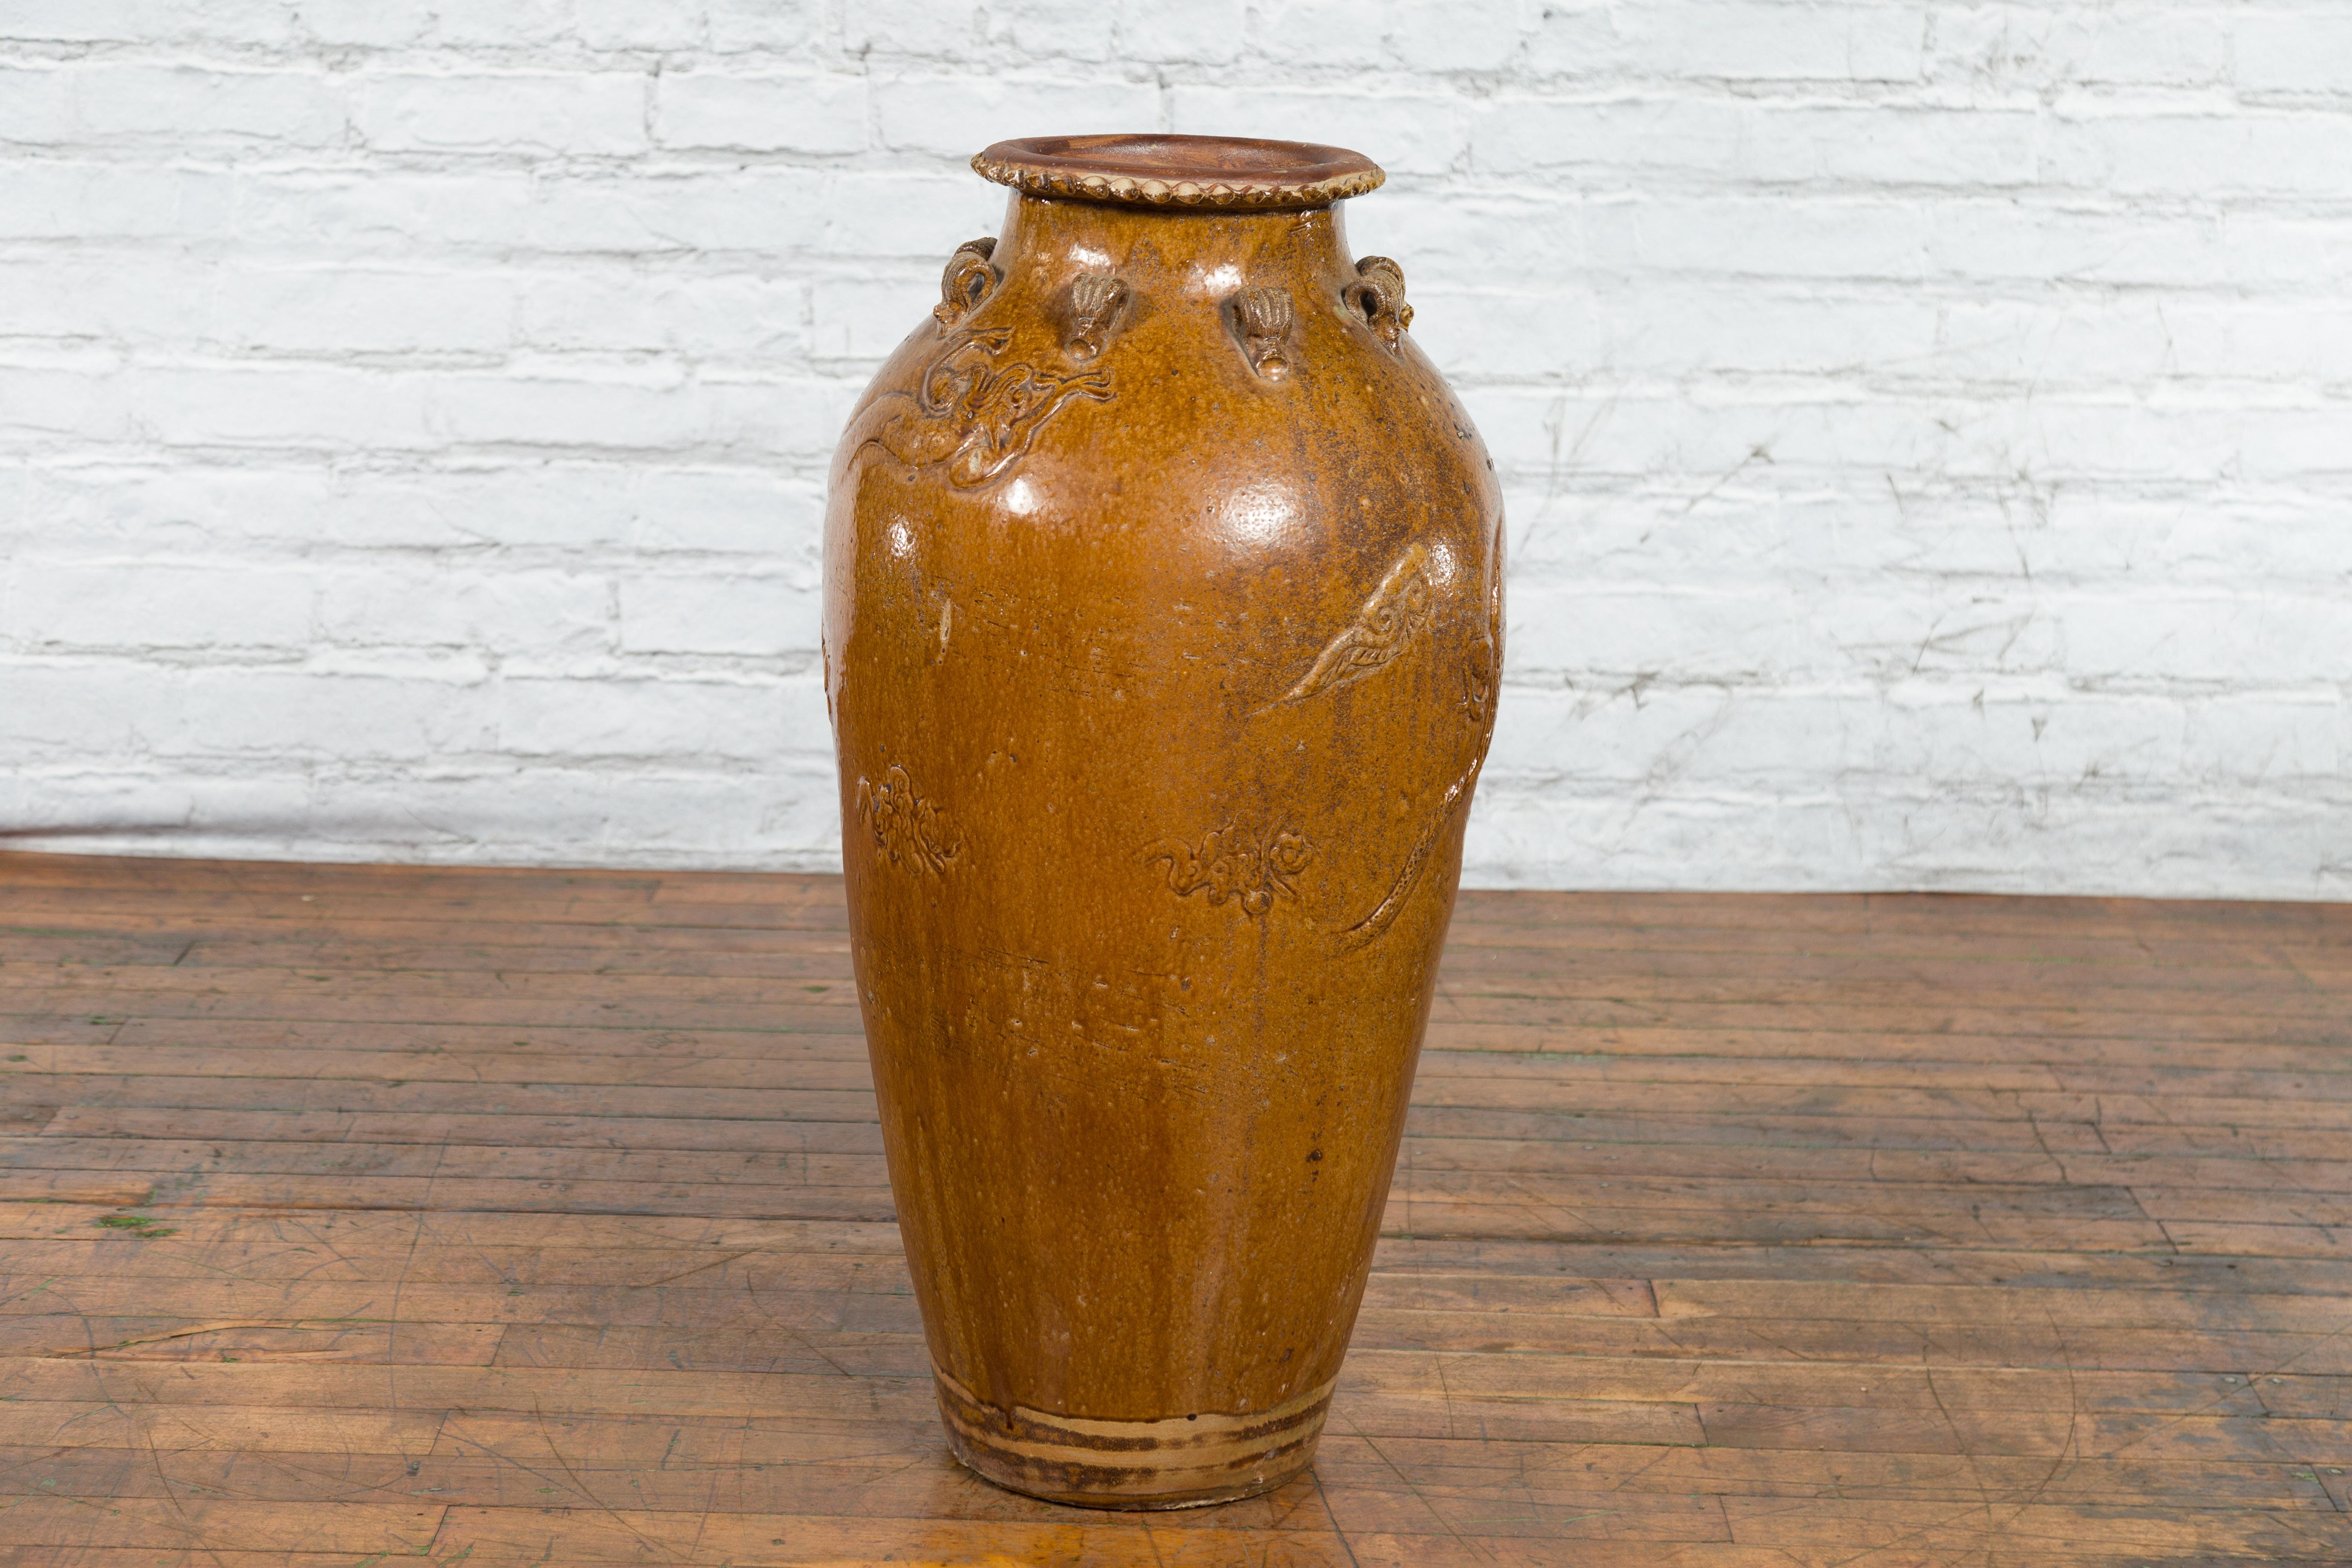 Tall Antique Qing Dynasty Period Martaban Jar from China, 18th-19th Century For Sale 4